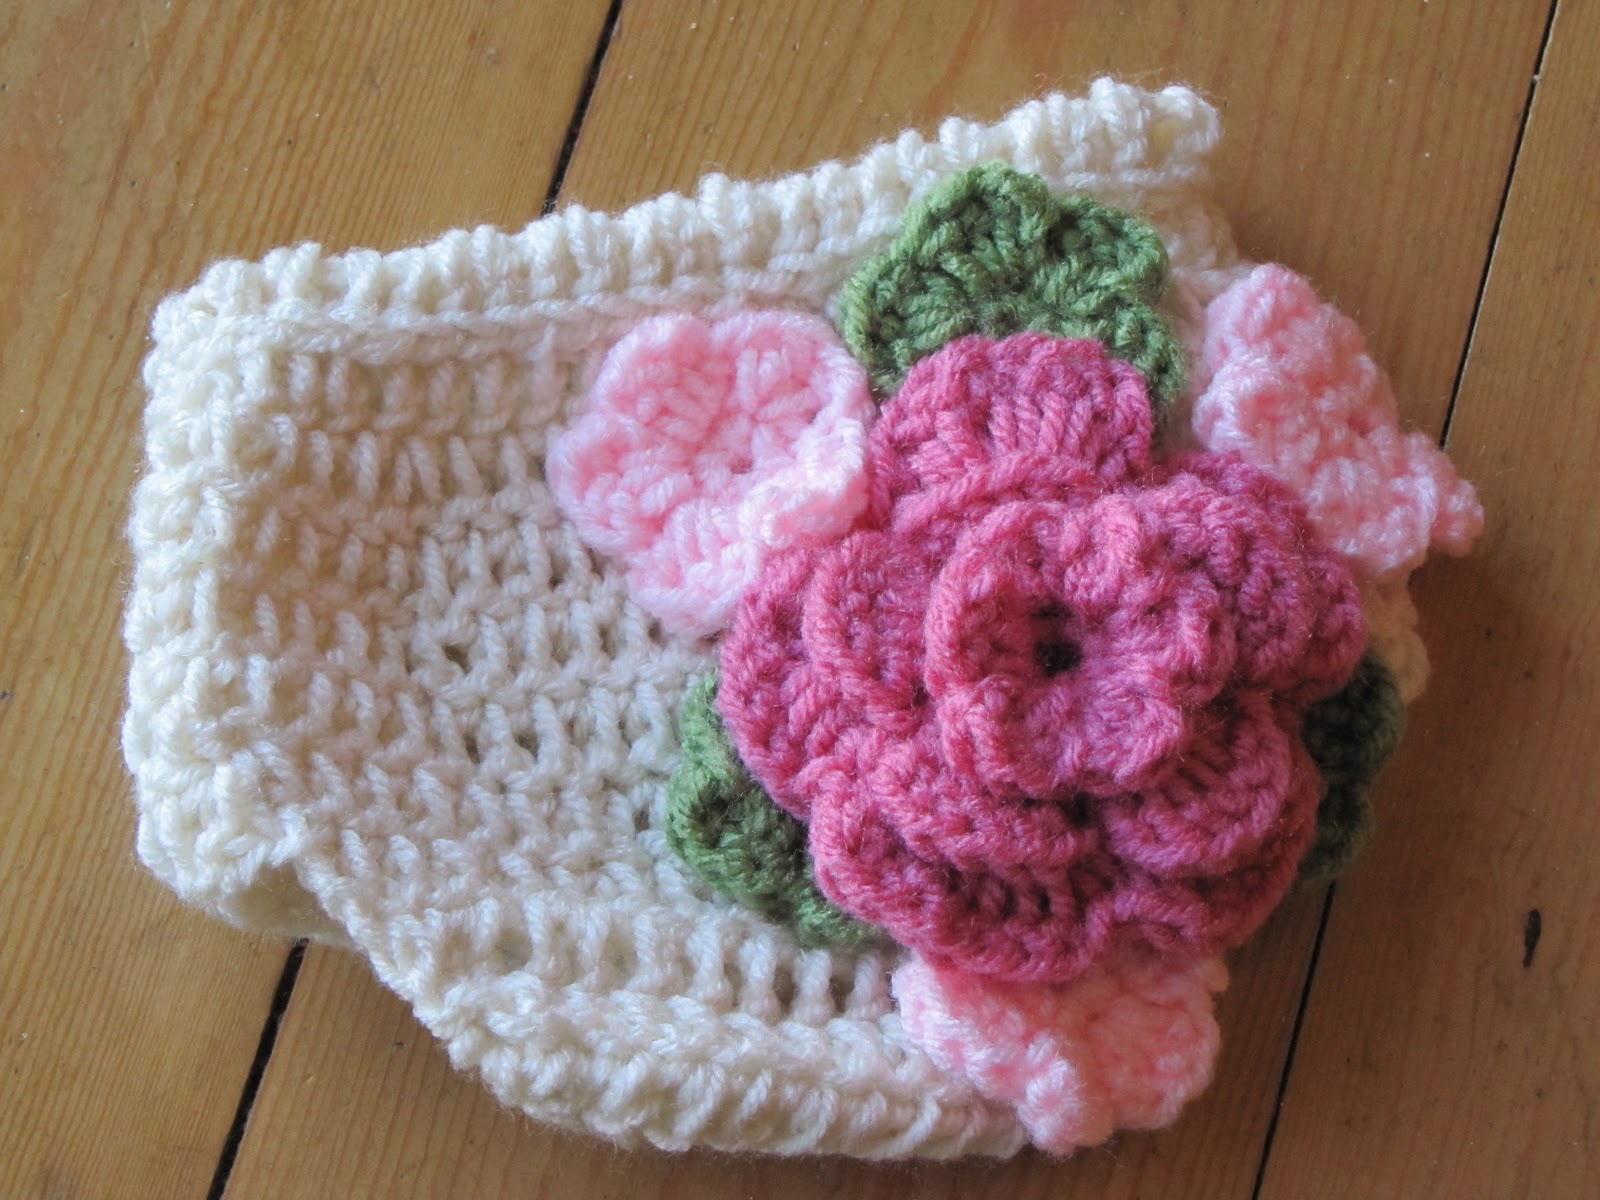 Crochet diaper cover pattern - Cloth Diapers  Parenting Community